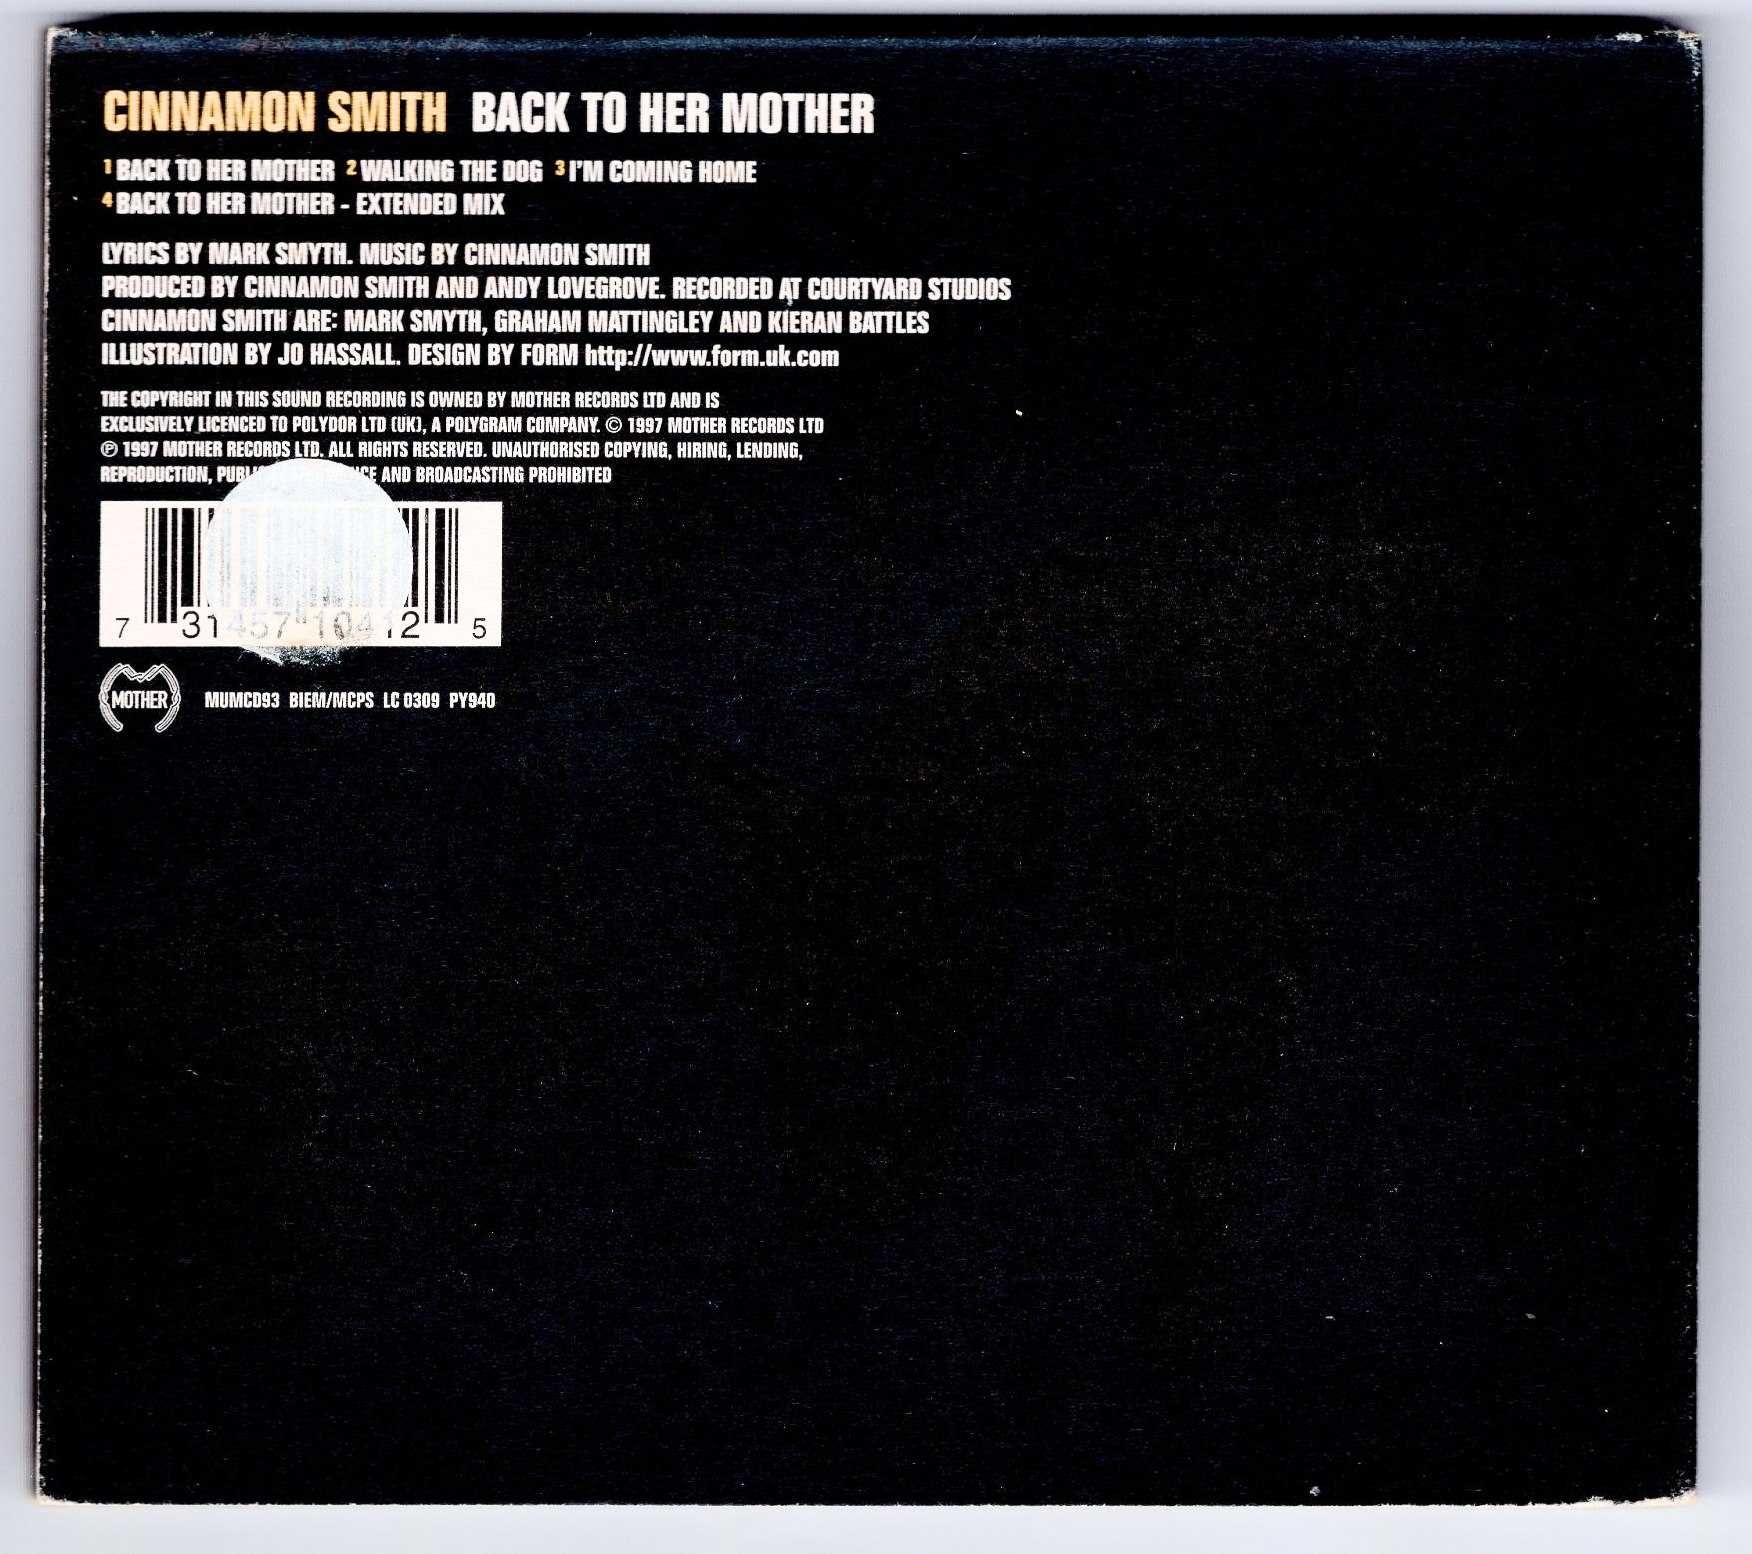 Cinnamon Smith - Back To Her Mother (CD, Singiel)